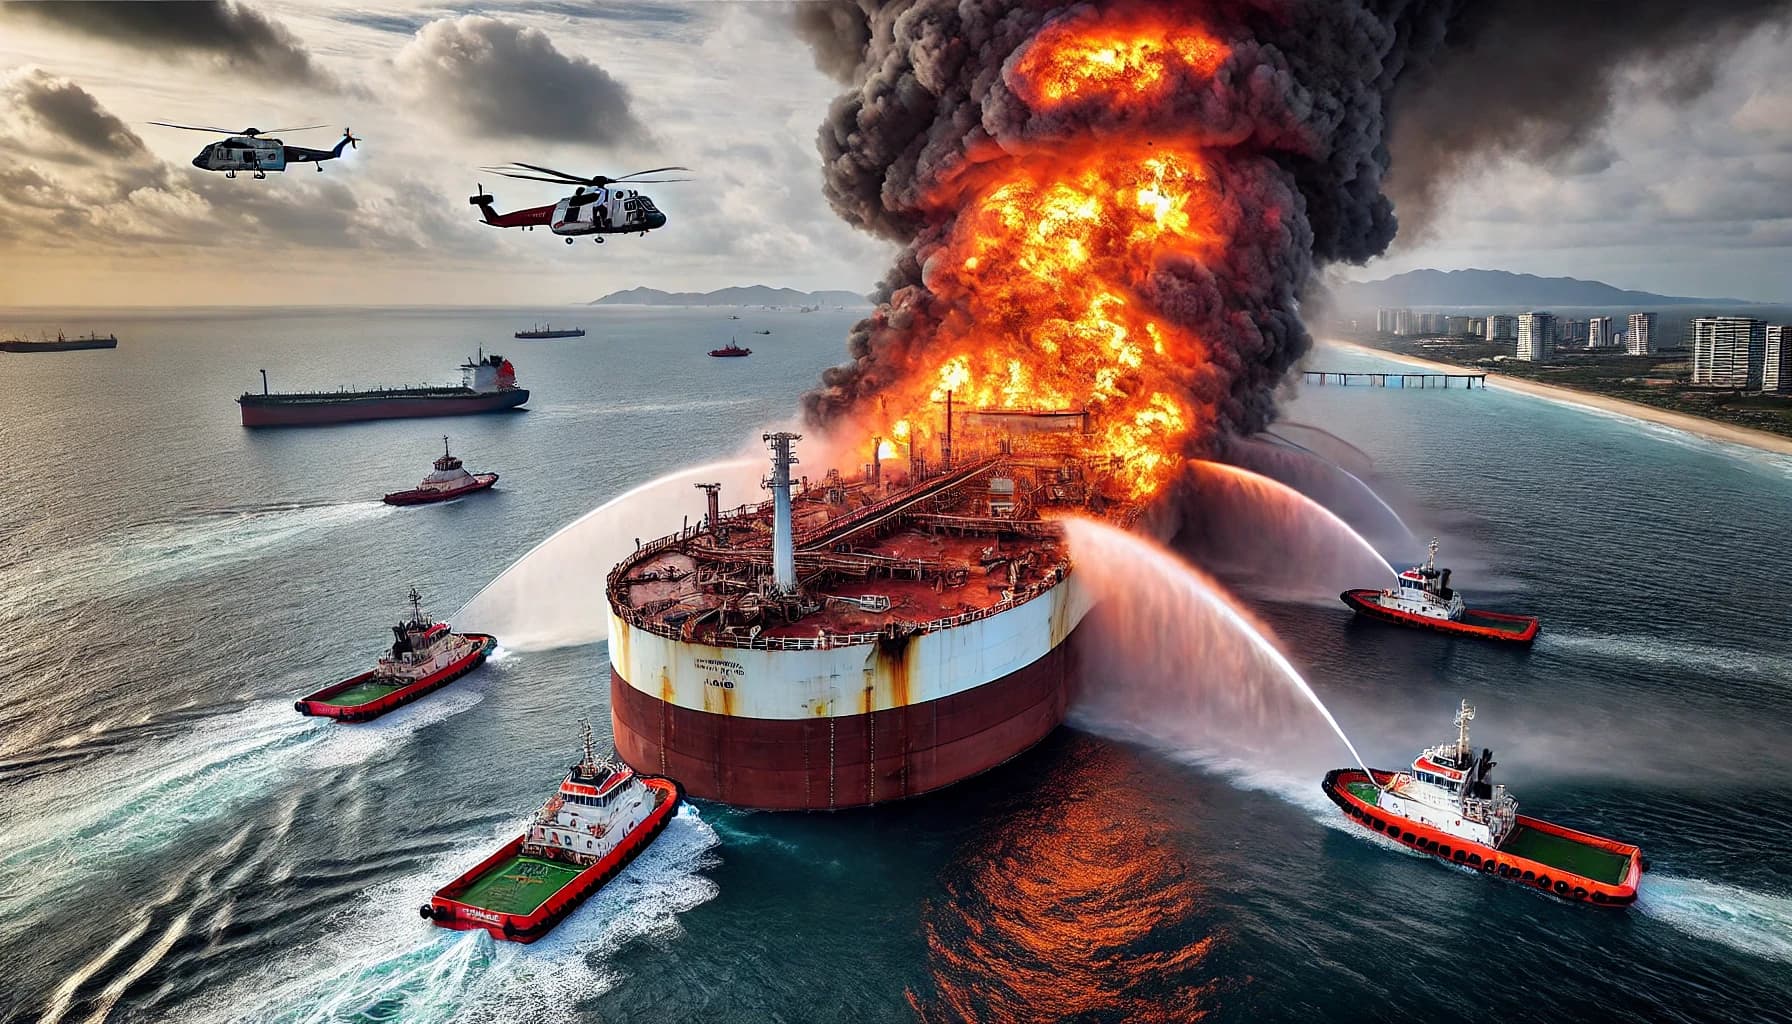 An FSO vessel on fire surrounded by fireboats and helicopters